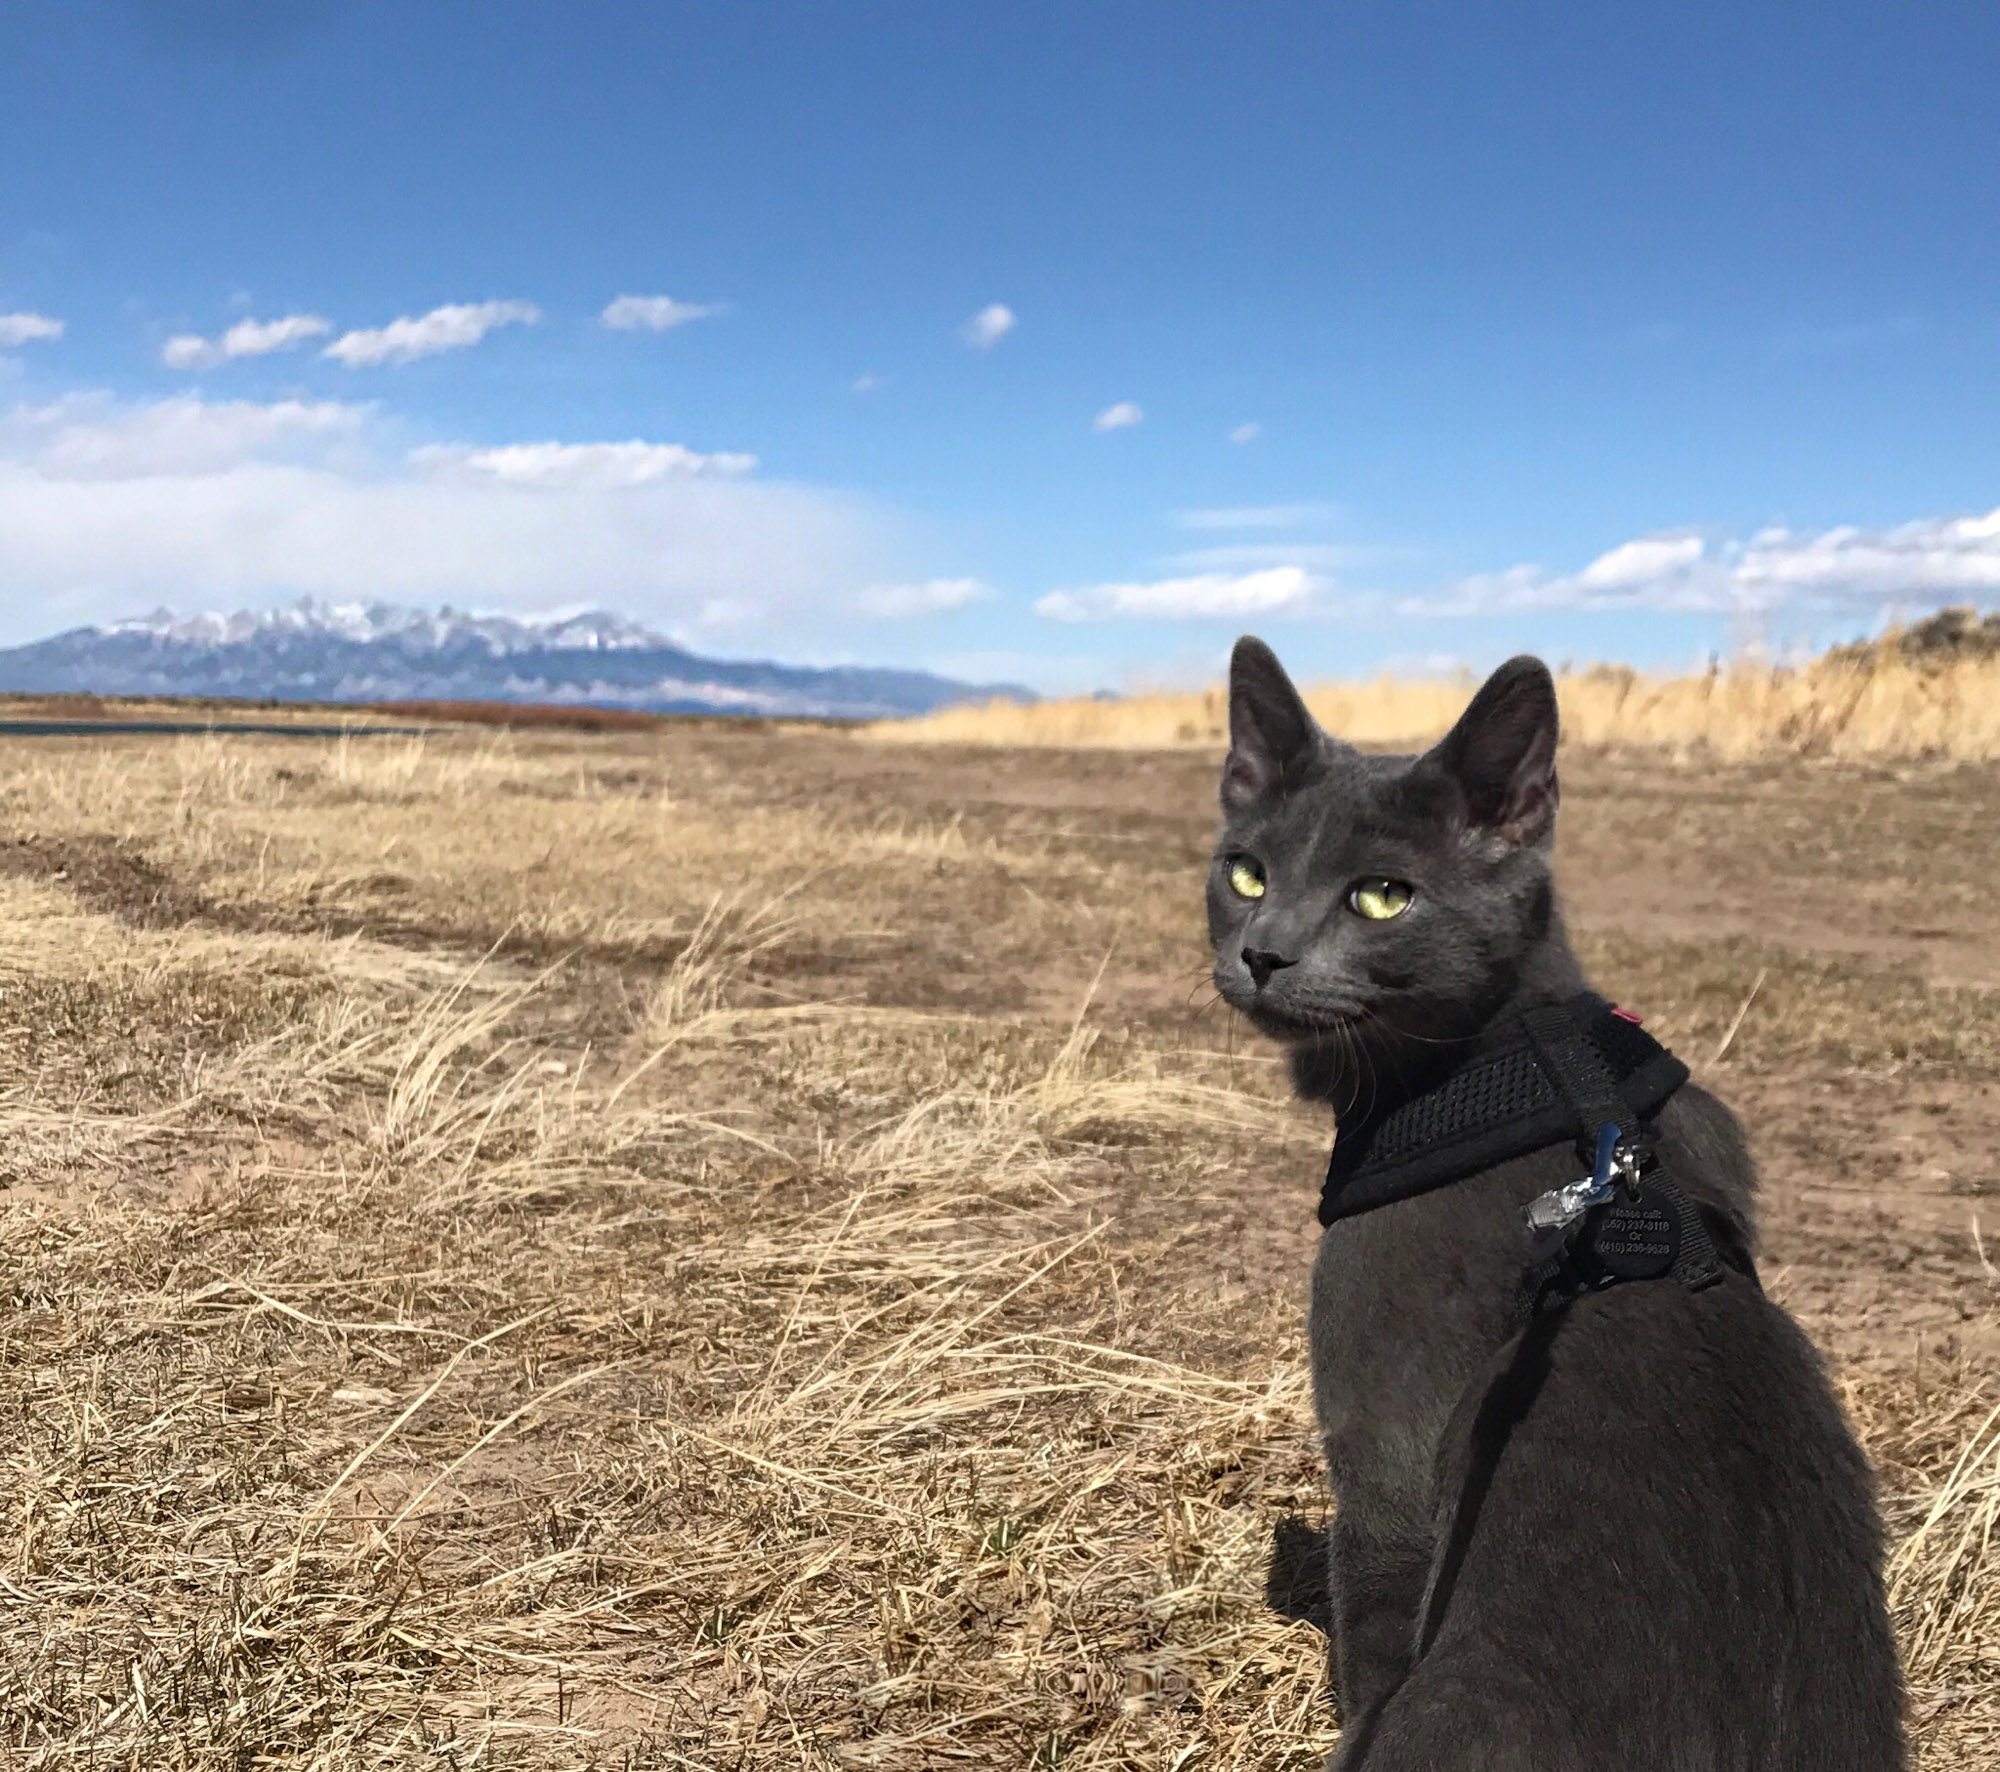 gray cat in harness looks at camera with mountains in the background